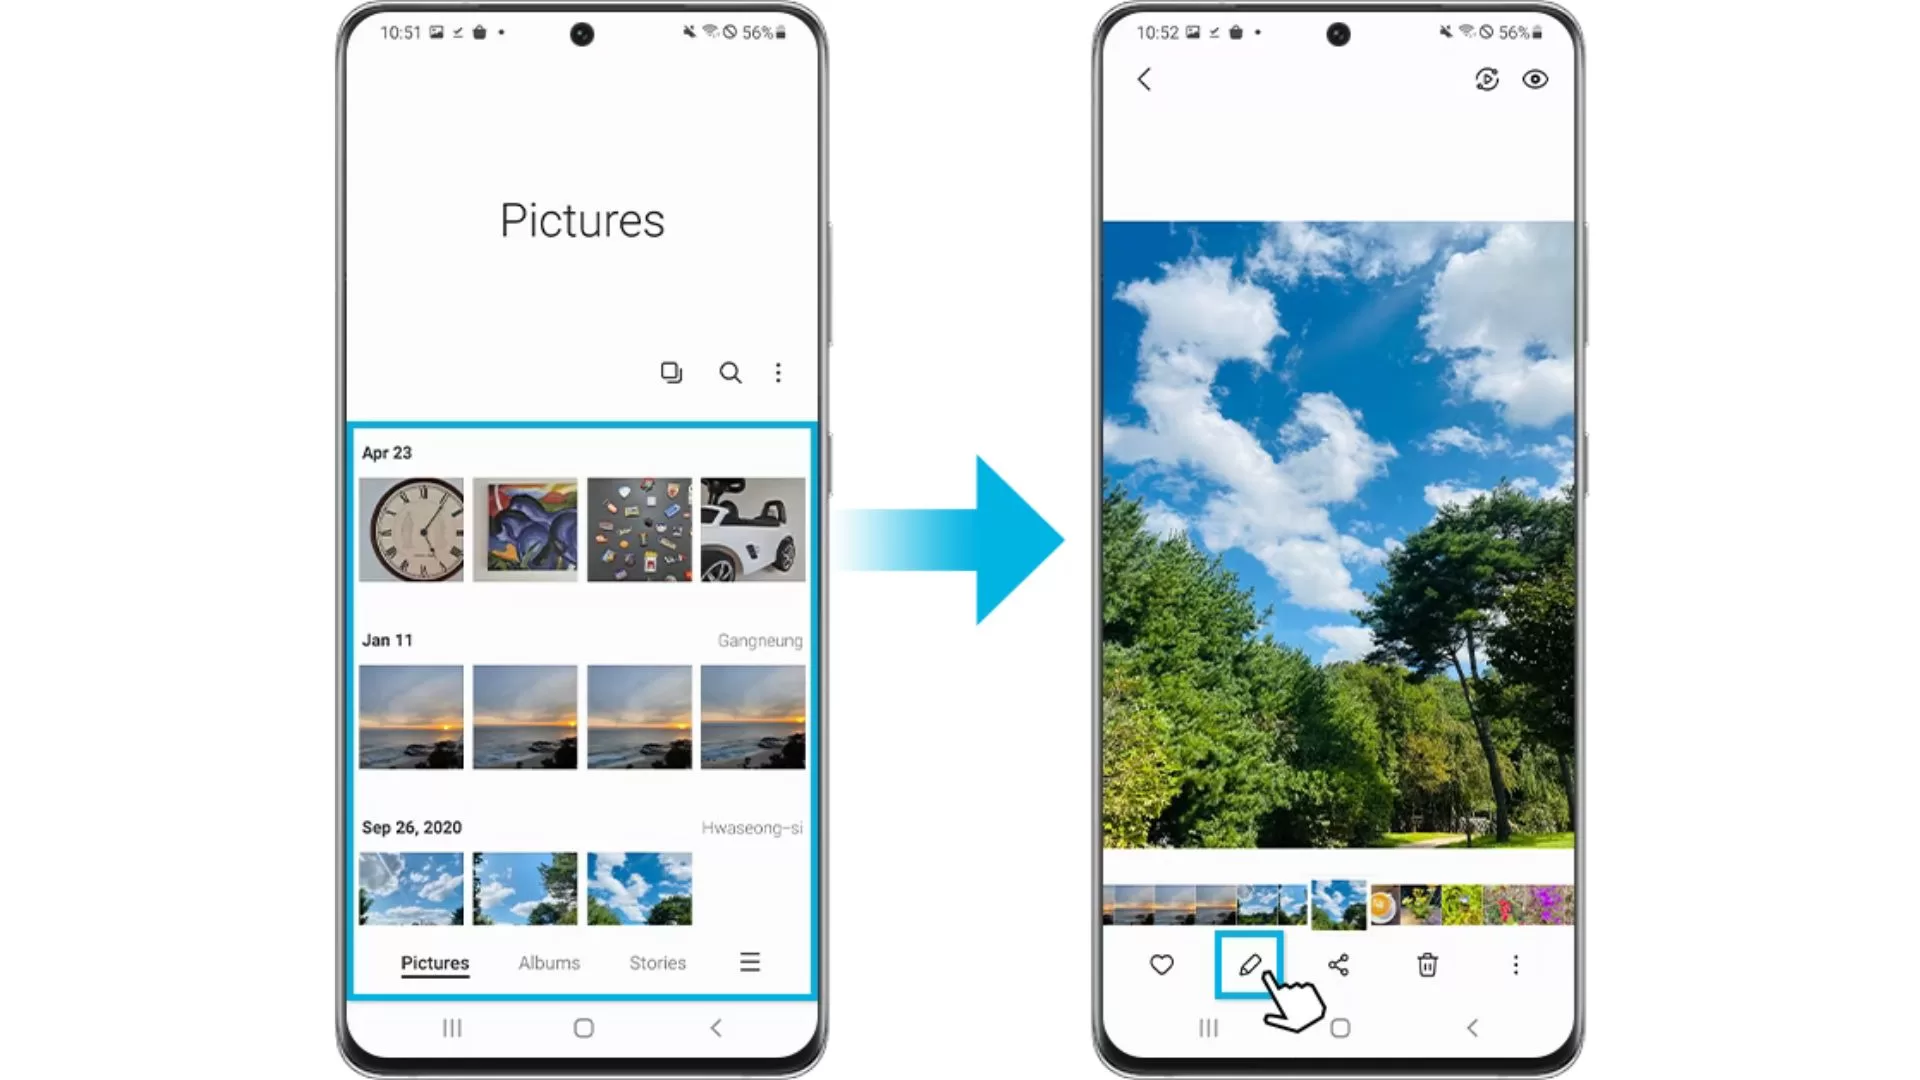 Use the Resize Image Feature in the Samsung Gallery